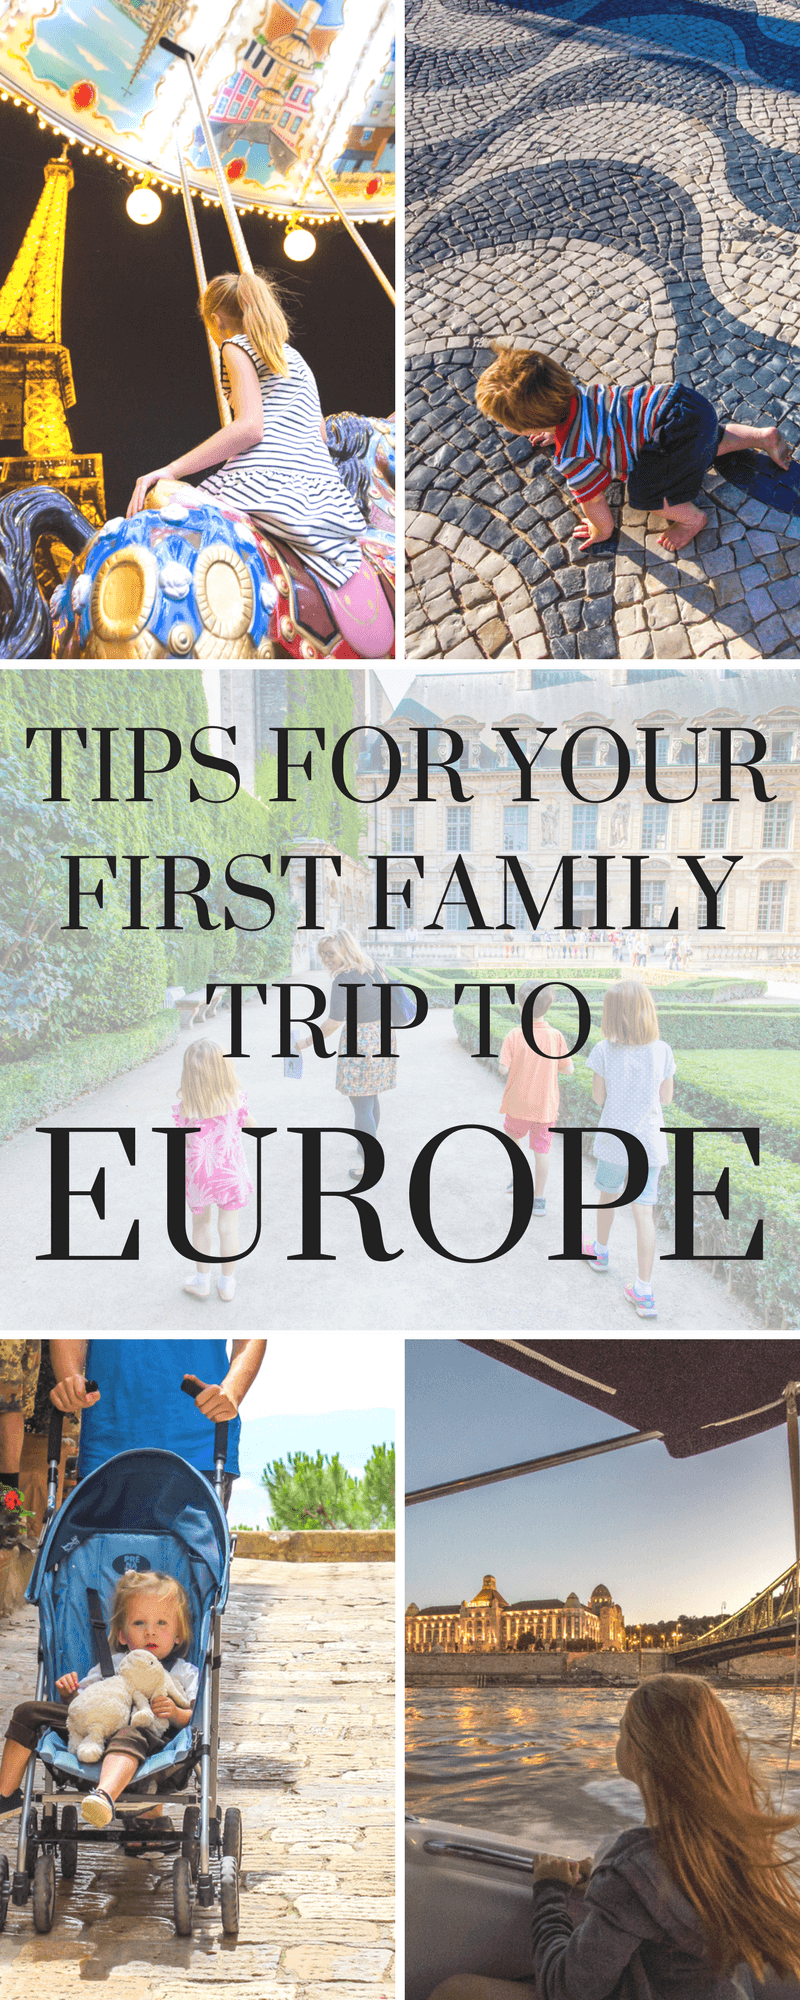 Taking your kids to Europe for the first time? Here's my advice, based on 15+ European trips with my kids over 10 years.